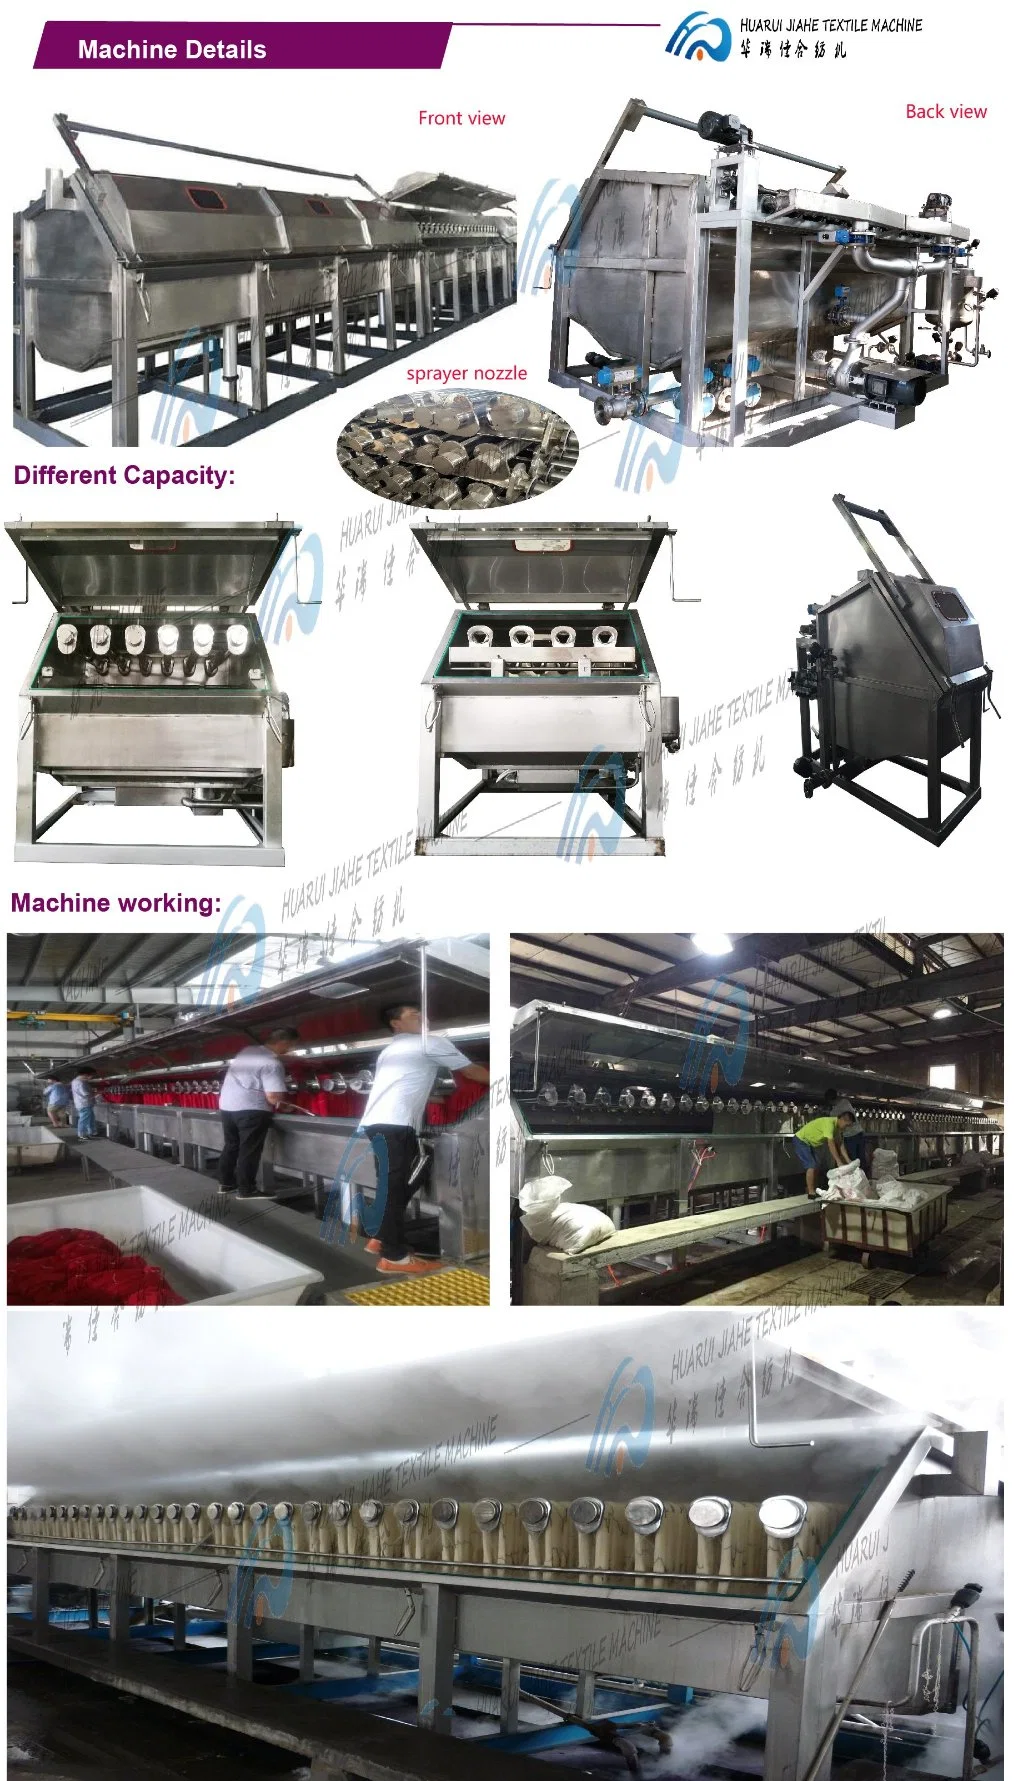 Max Working Temperature 98 It Can Be Used for Both Pre Treatment and After Treatment. Normal Temperature Hank Automatic Spray Dyeing Machine